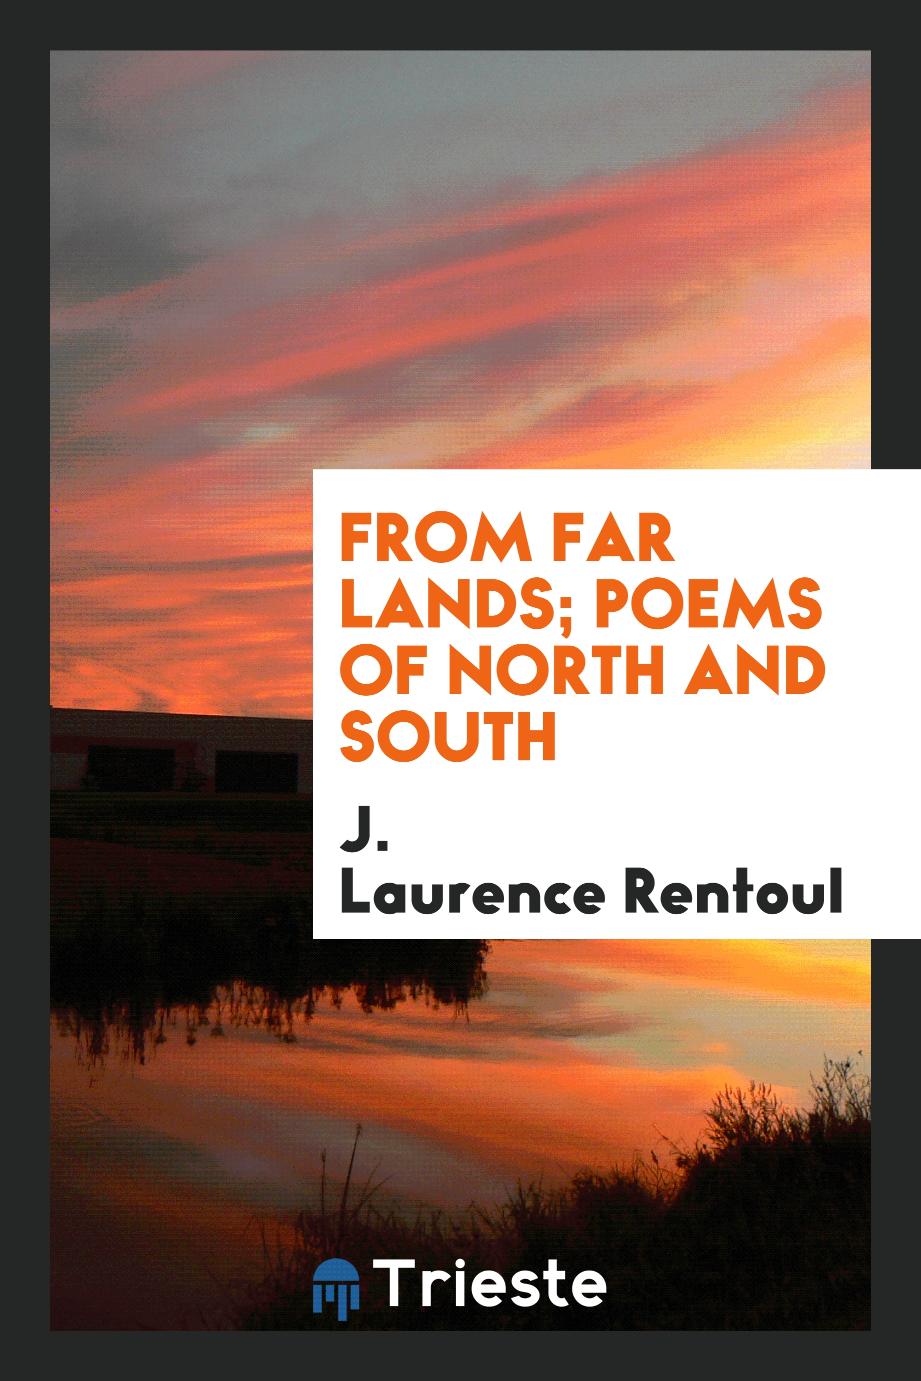 From far lands; poems of north and south